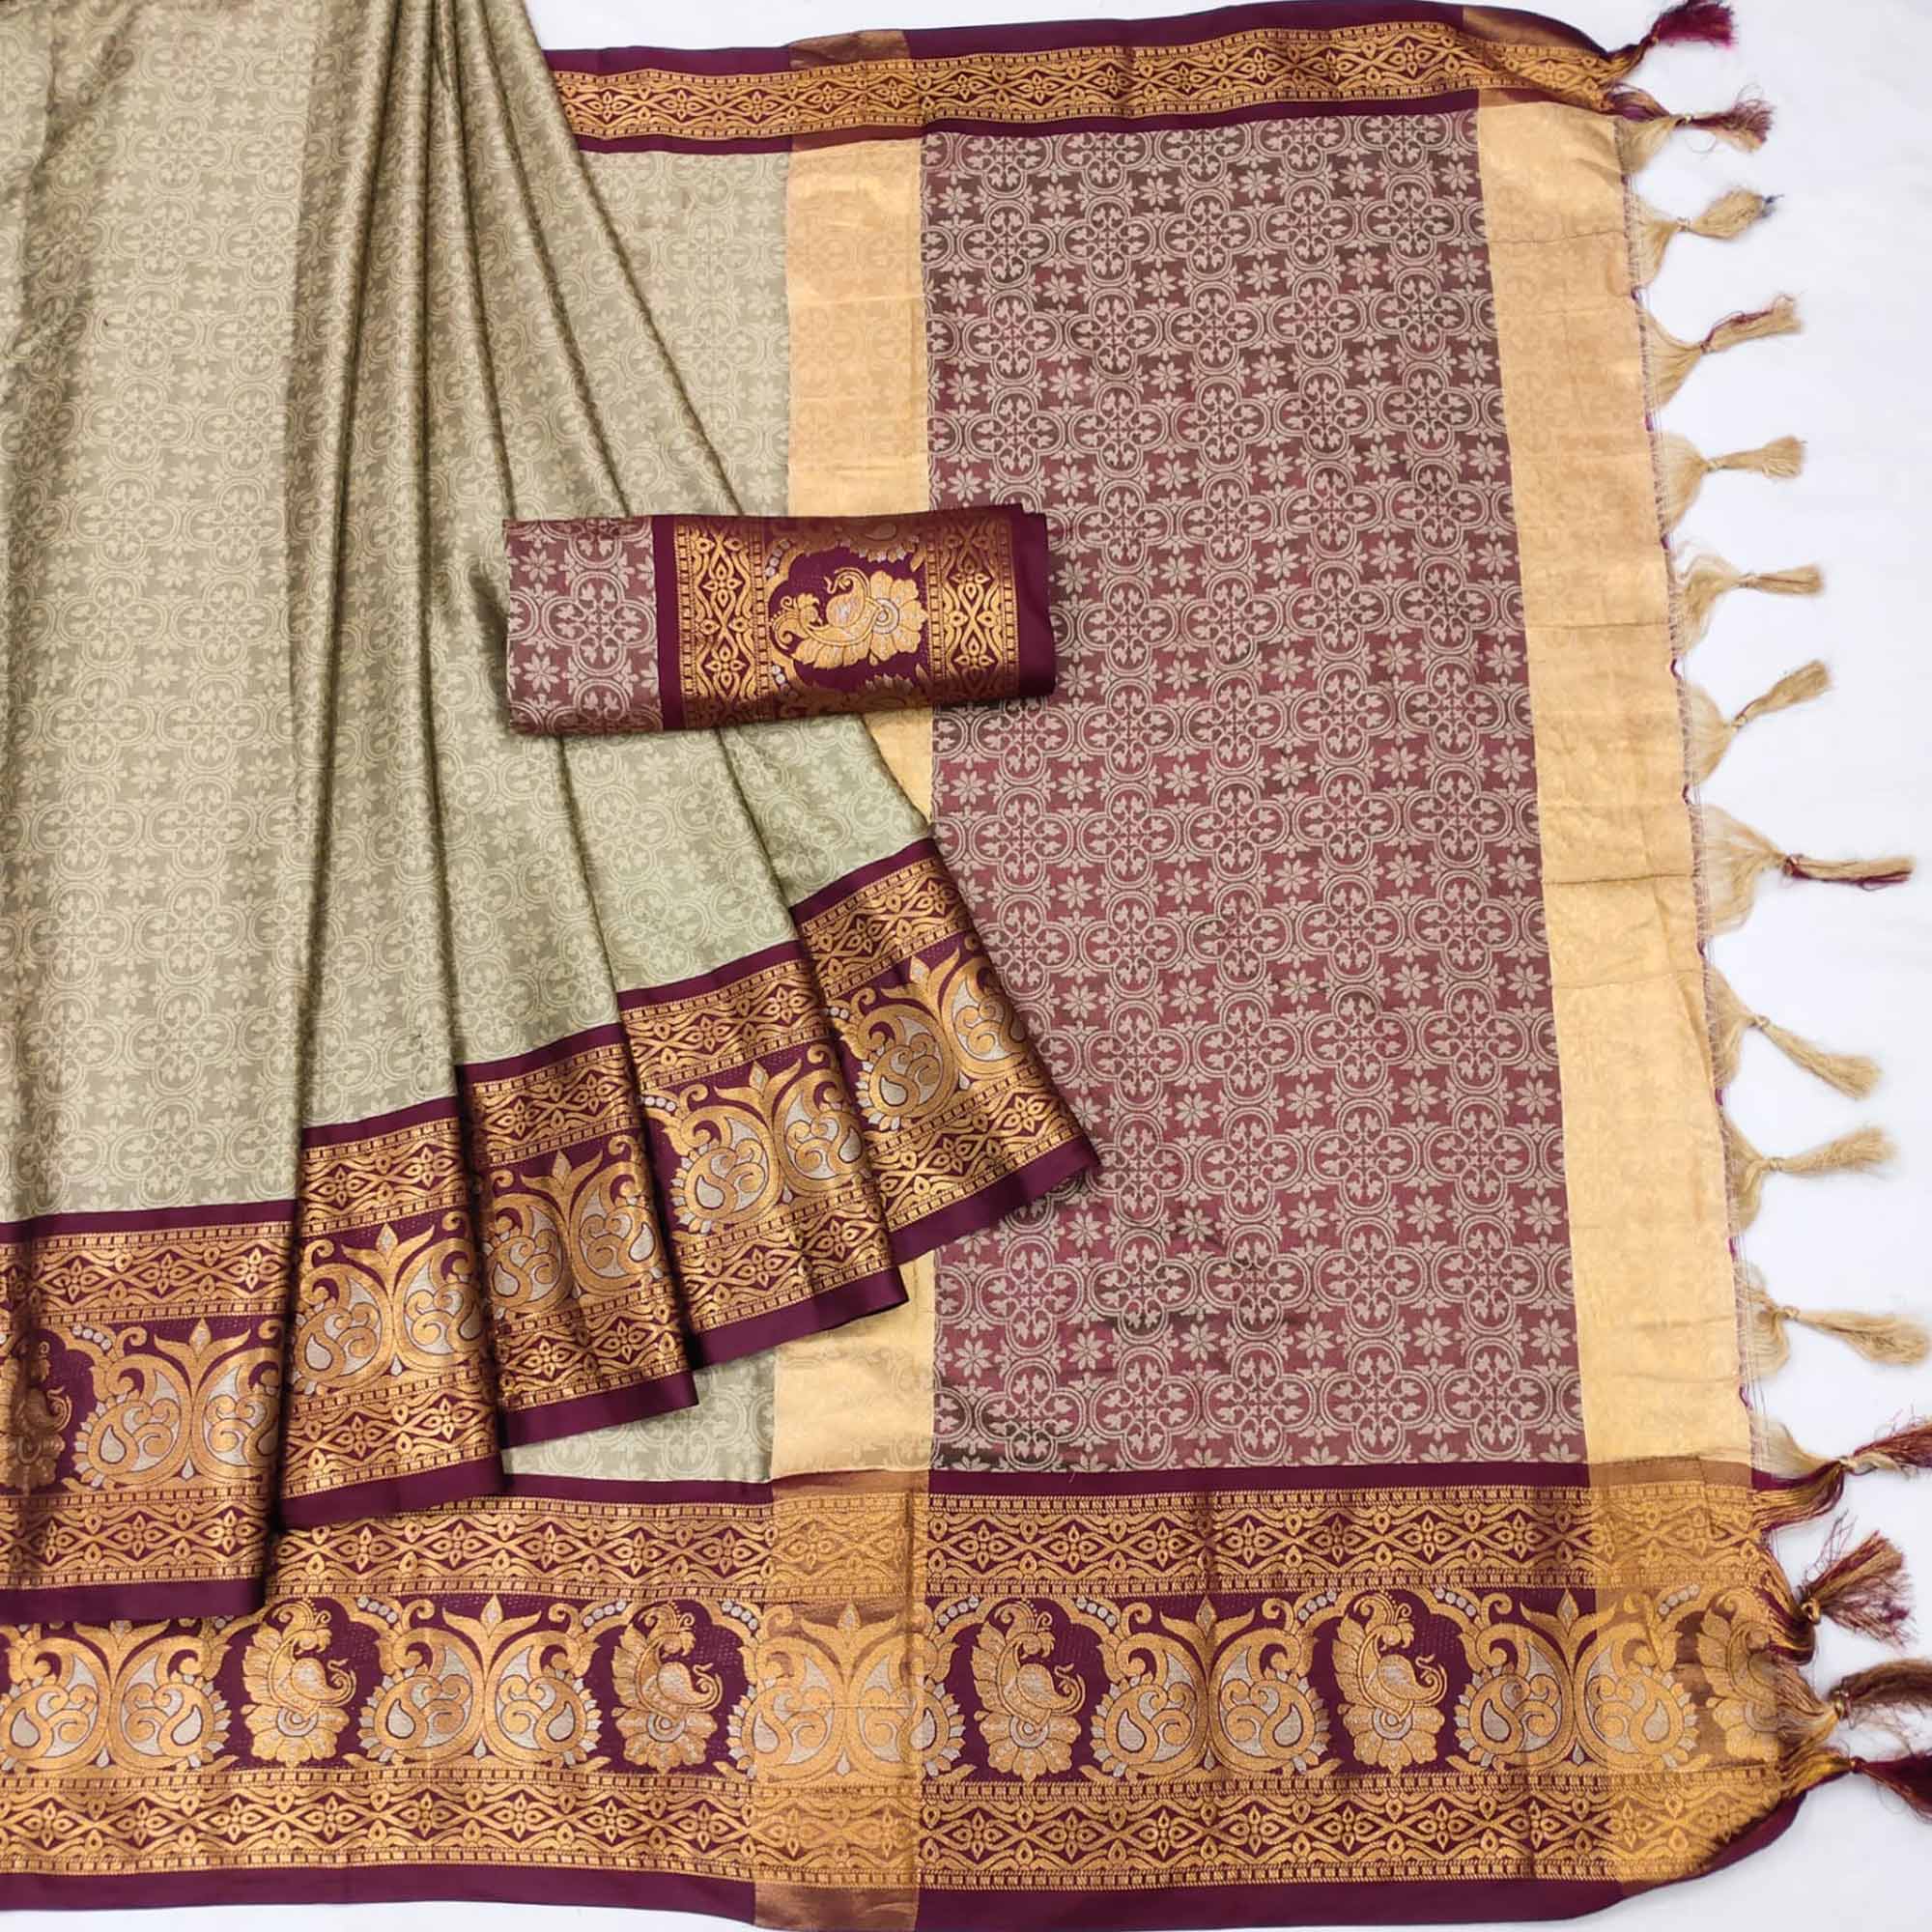 Chikoo Floral Woven Cotton Silk Saree With Tassels